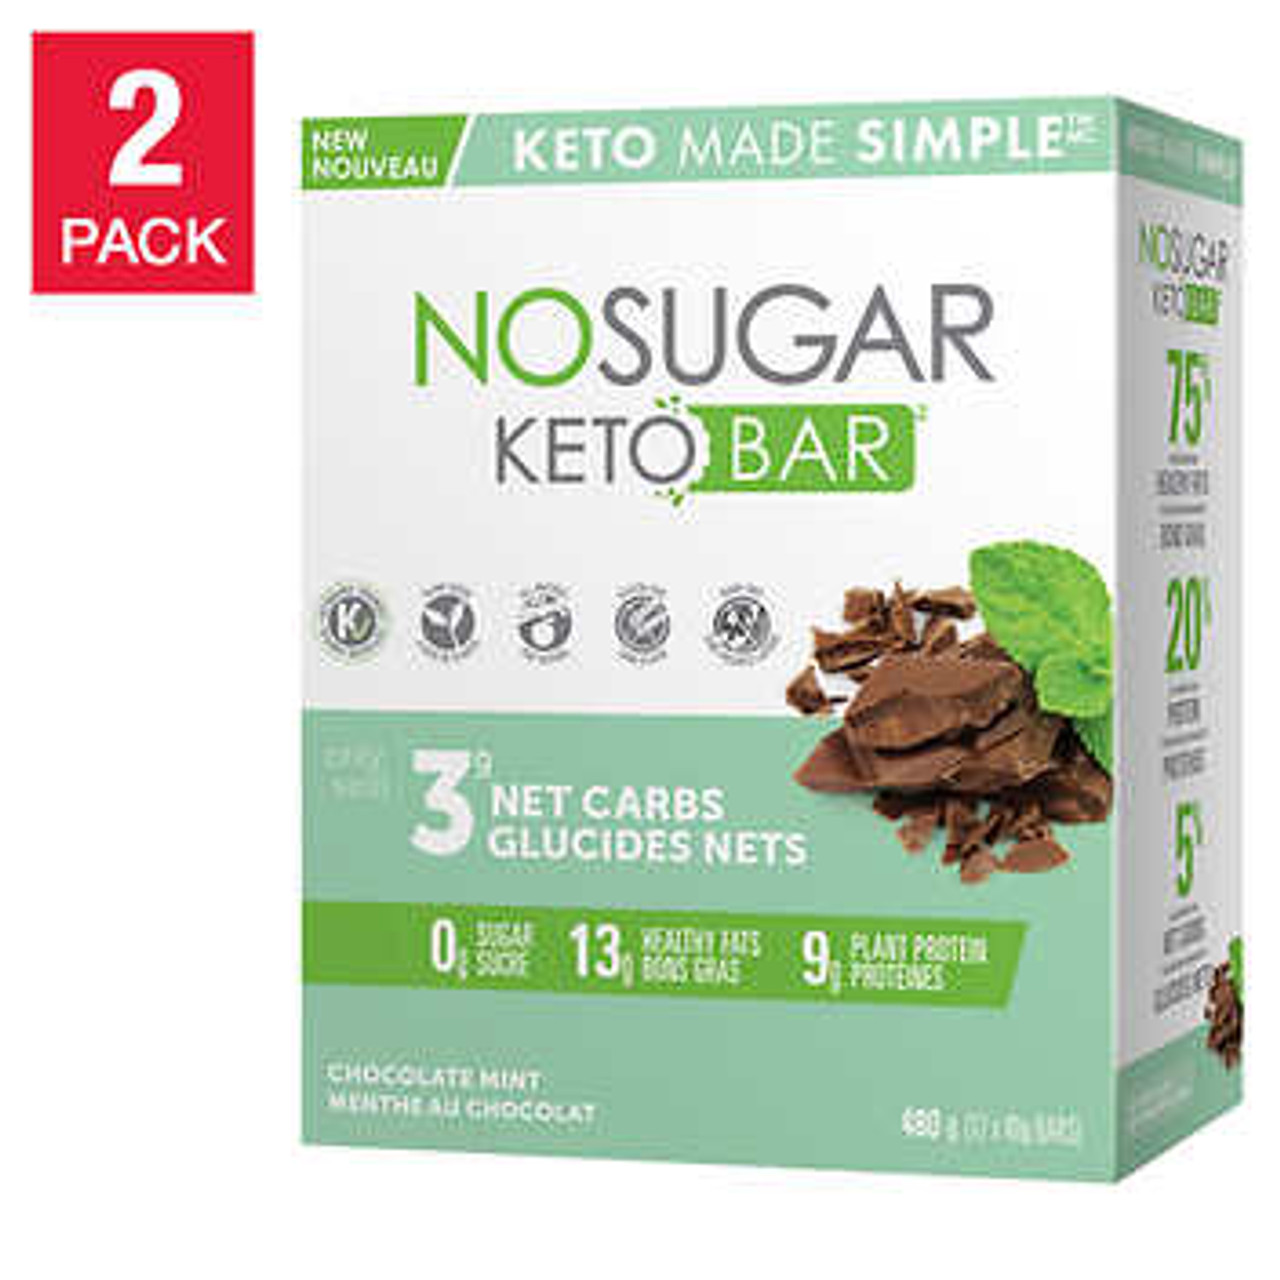 No Sugar Keto Bar Chocolate Mint Bars 2-Pack - Indulge in Refreshing Keto Flavors- Chicken Pieces